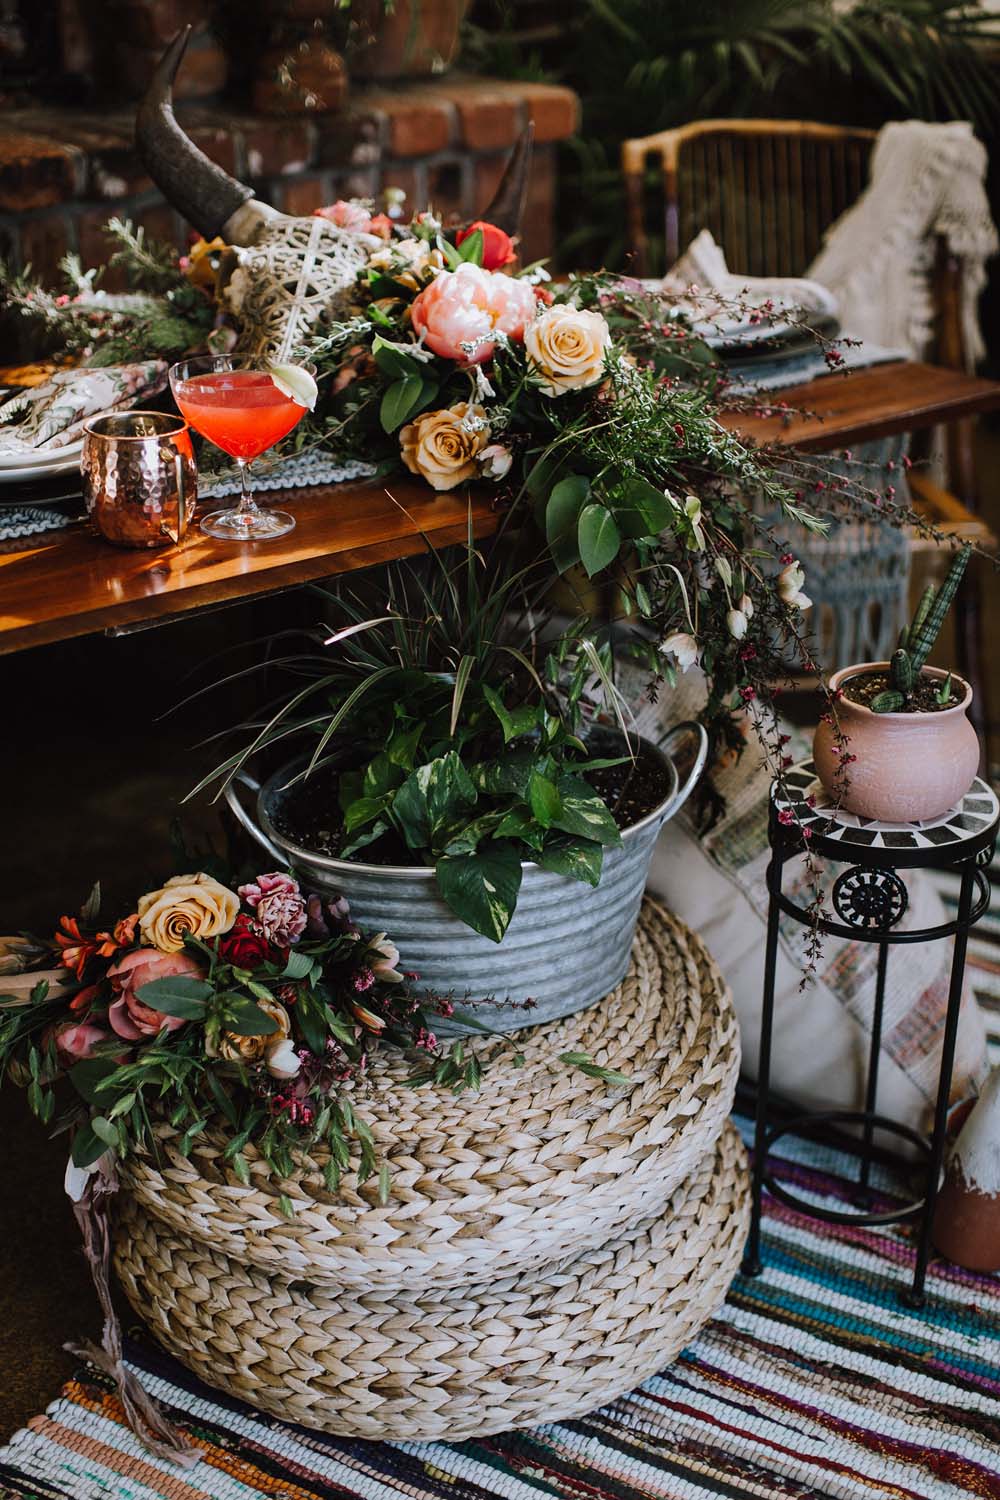 These Are The Details You Need For A Southwestern-Inspired Wedding - decor